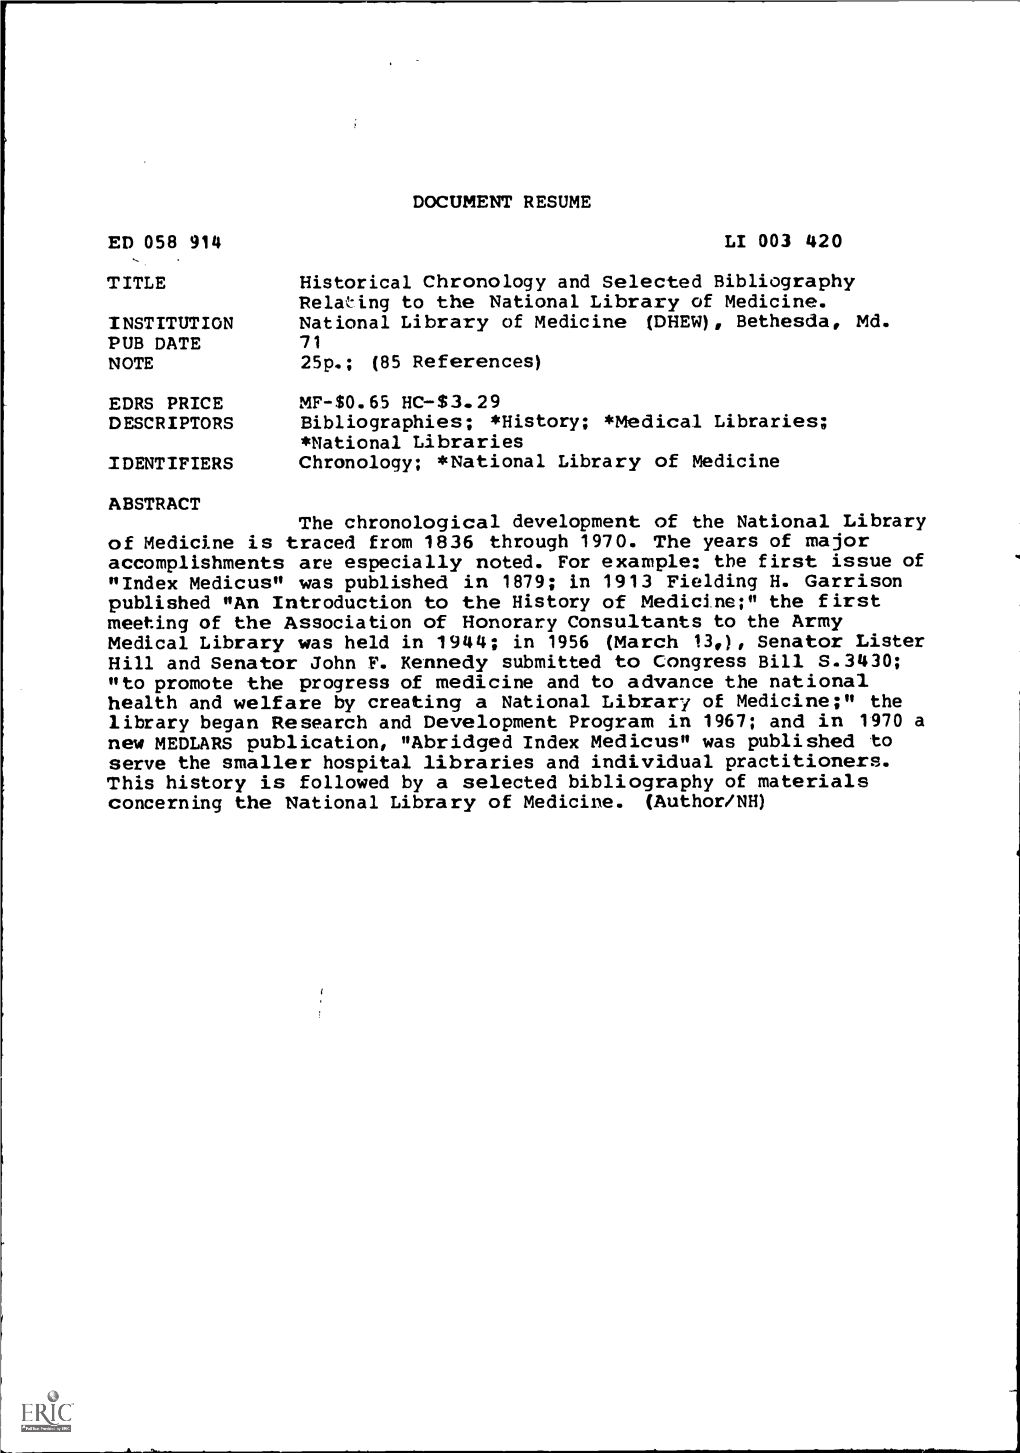 DOCUMENT RESUME Relaing to the National Library of Medicine. The